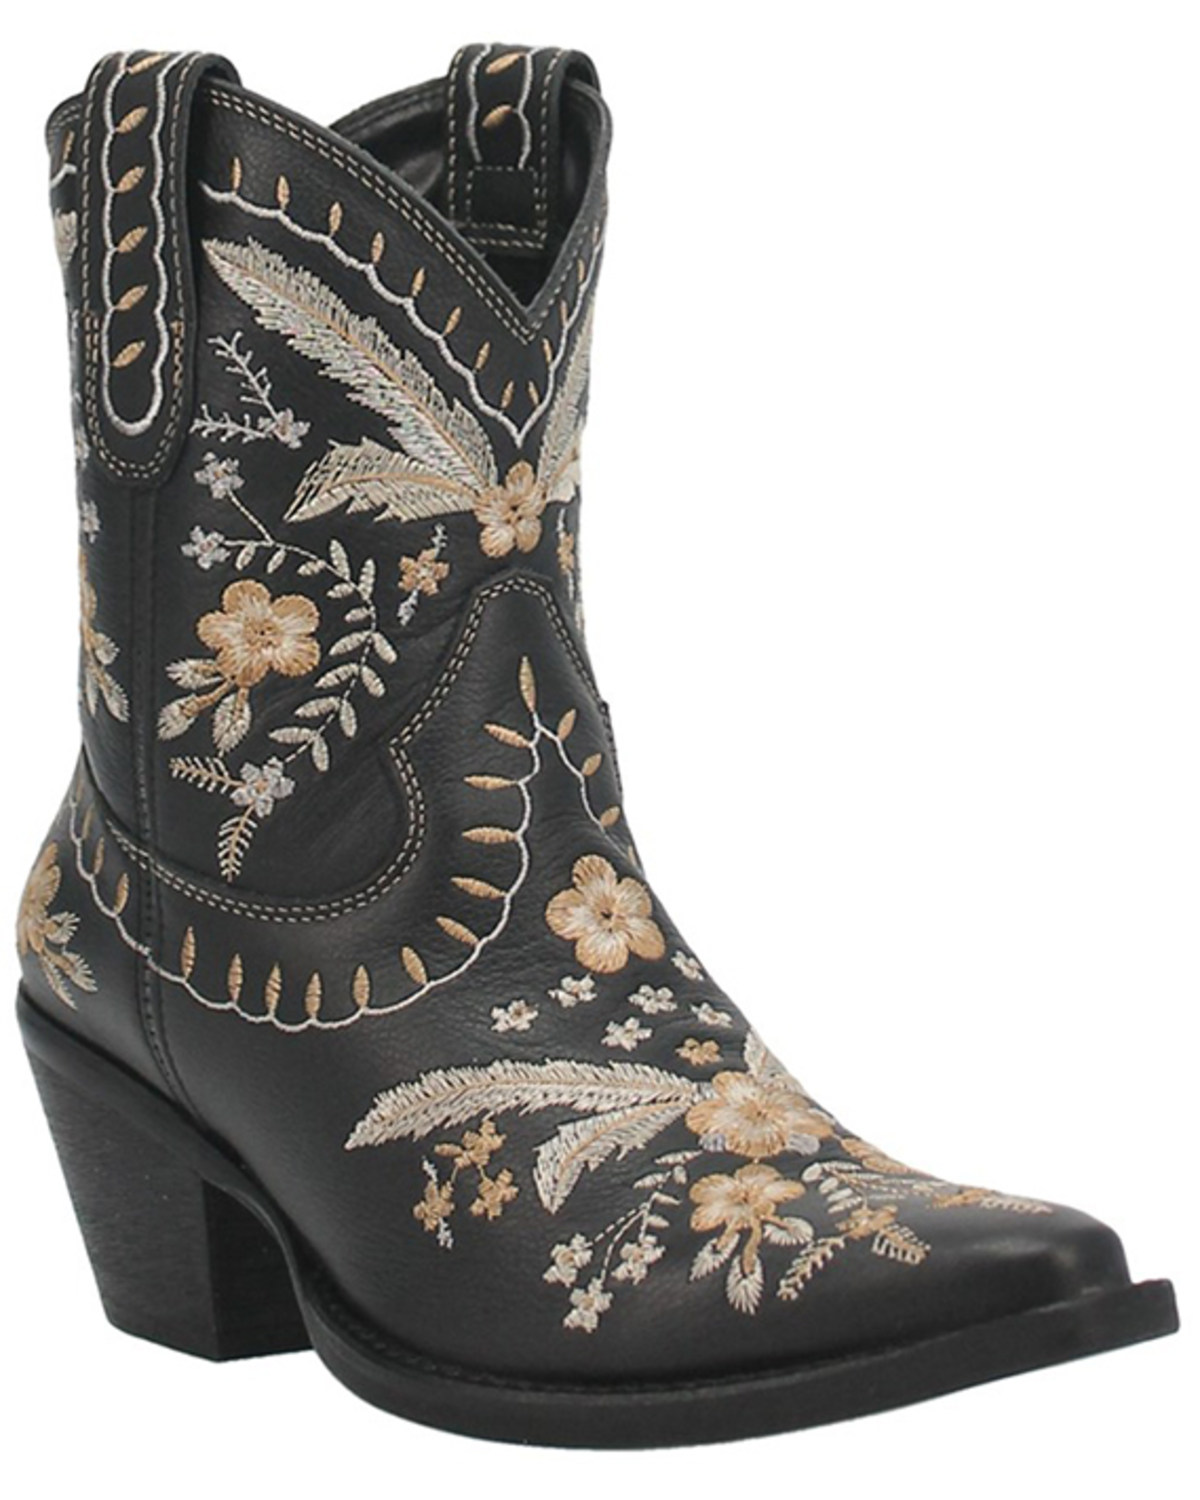 Dingo Women's Primrose Embroidered Floral Western Booties - Almond Toe